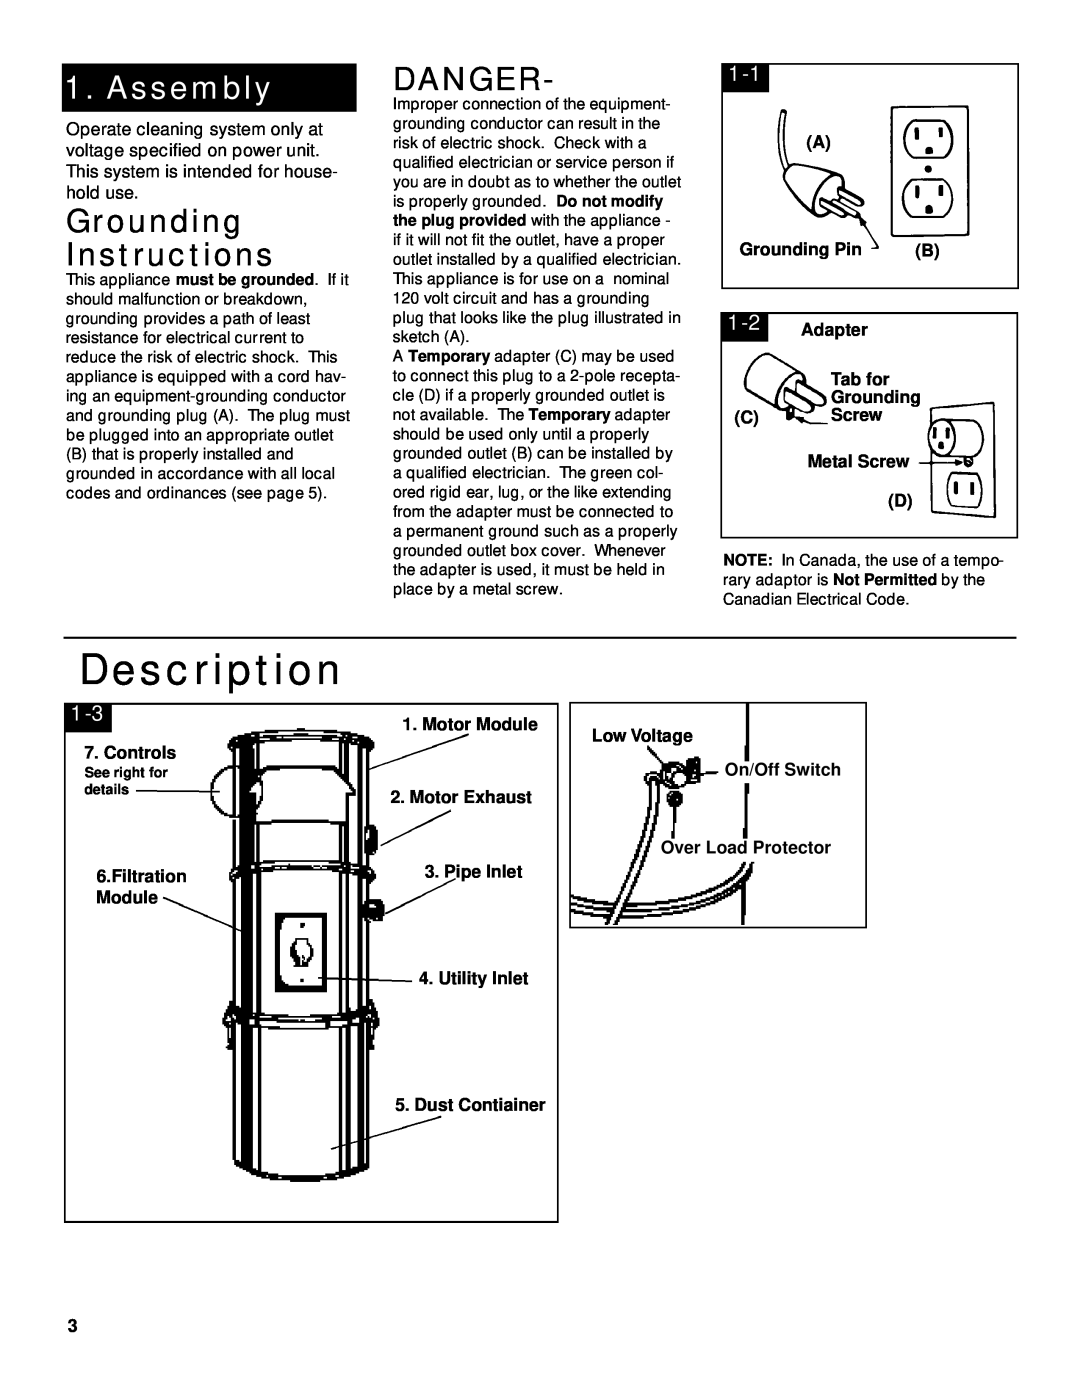 Hoover Central Vacuum Systems Assembly, Grounding Instructions, Danger, Motor Module Low Voltage 7. Controls, Filtration 